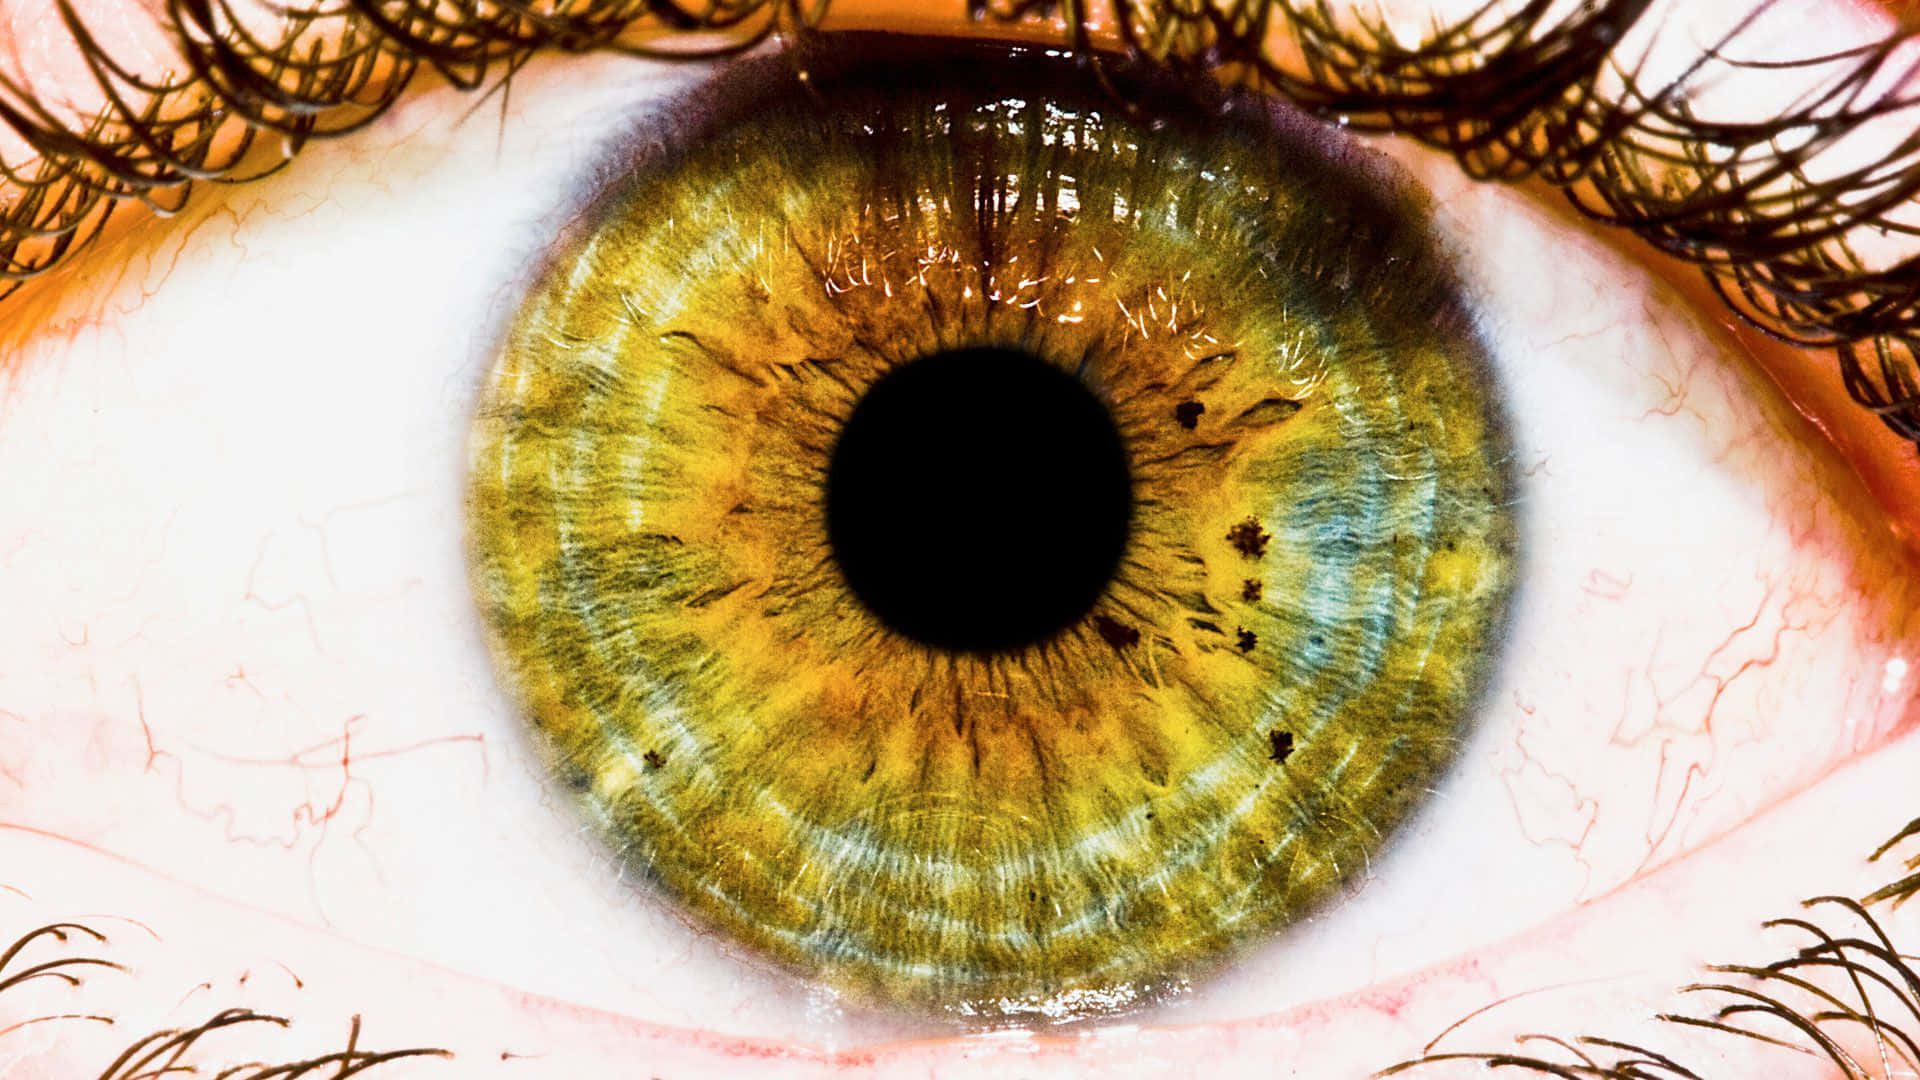 Intriguing Eye Close-up on Colorful Background